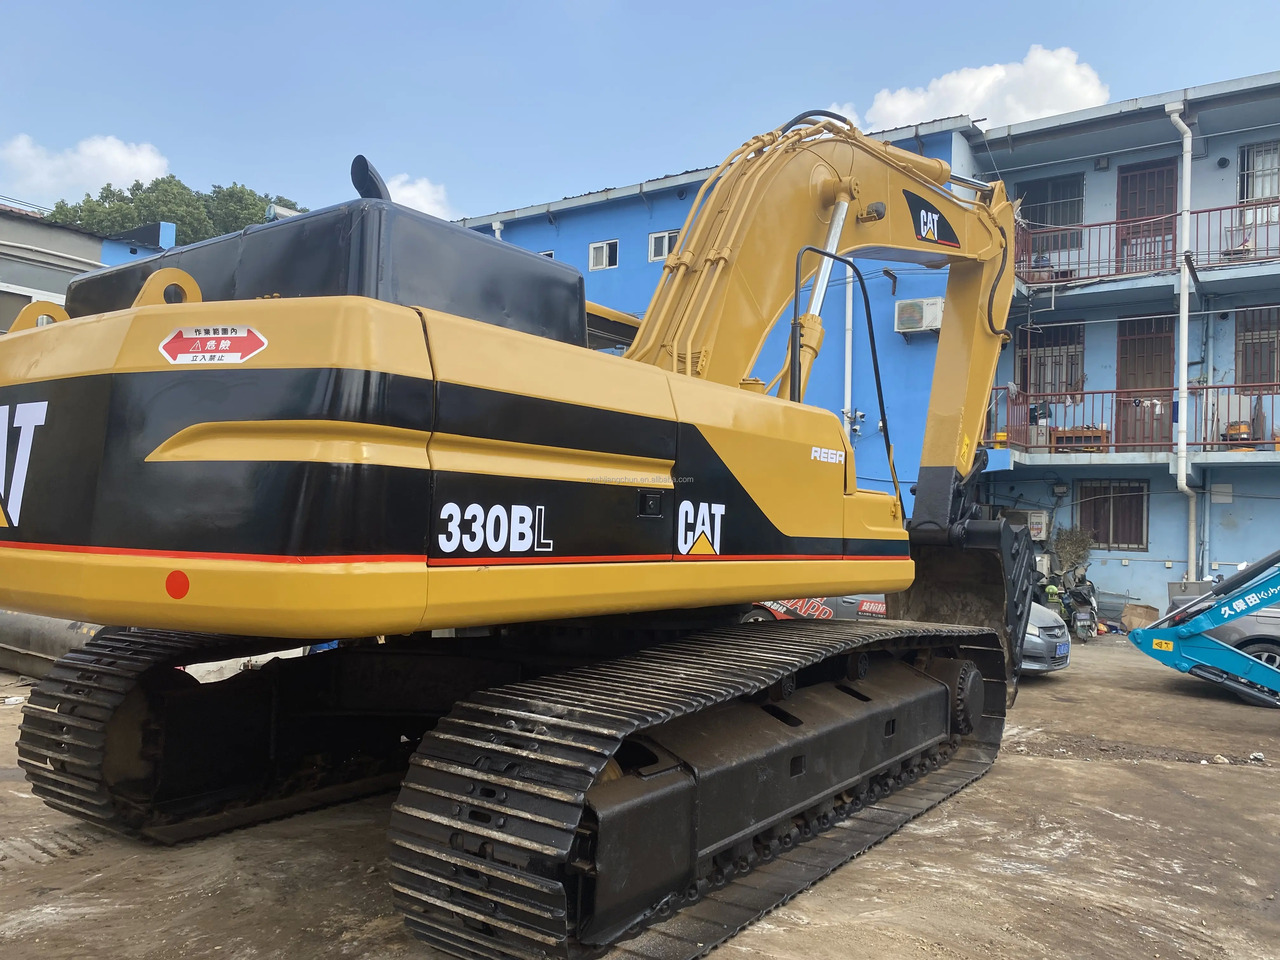 Crawler excavator new price for Used Caterpillar crawler excavator CAT 330BL in good condition for sale with low price: picture 4